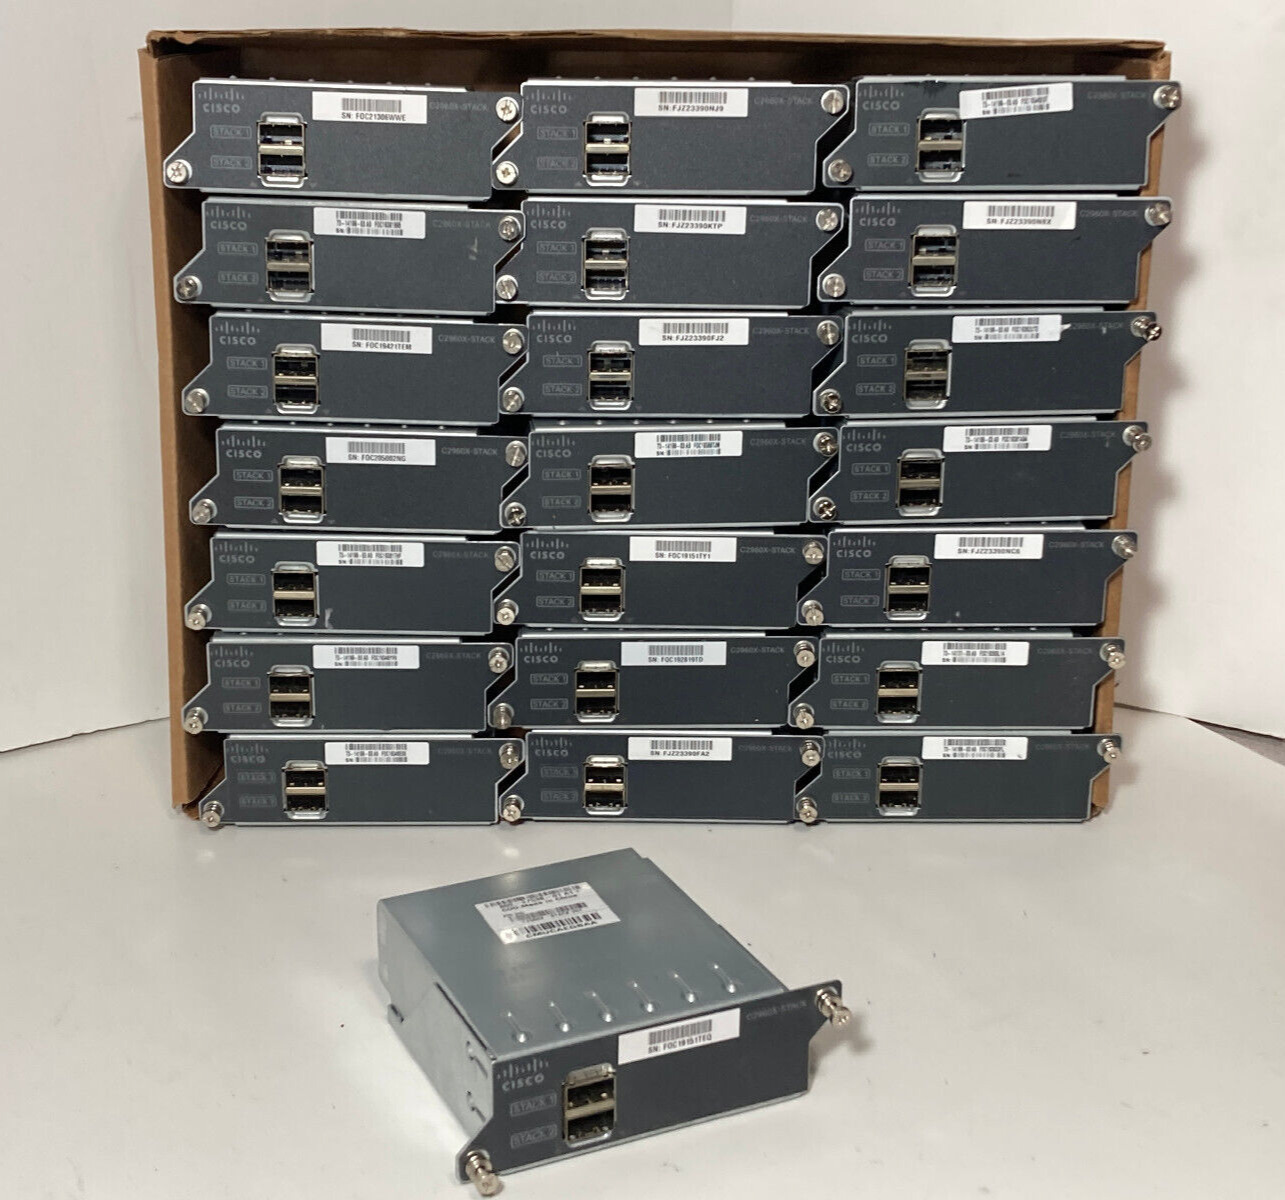 Cisco C2960X-STACK Hot-Swap Stacking Module for 2960X and 2960XR Switch